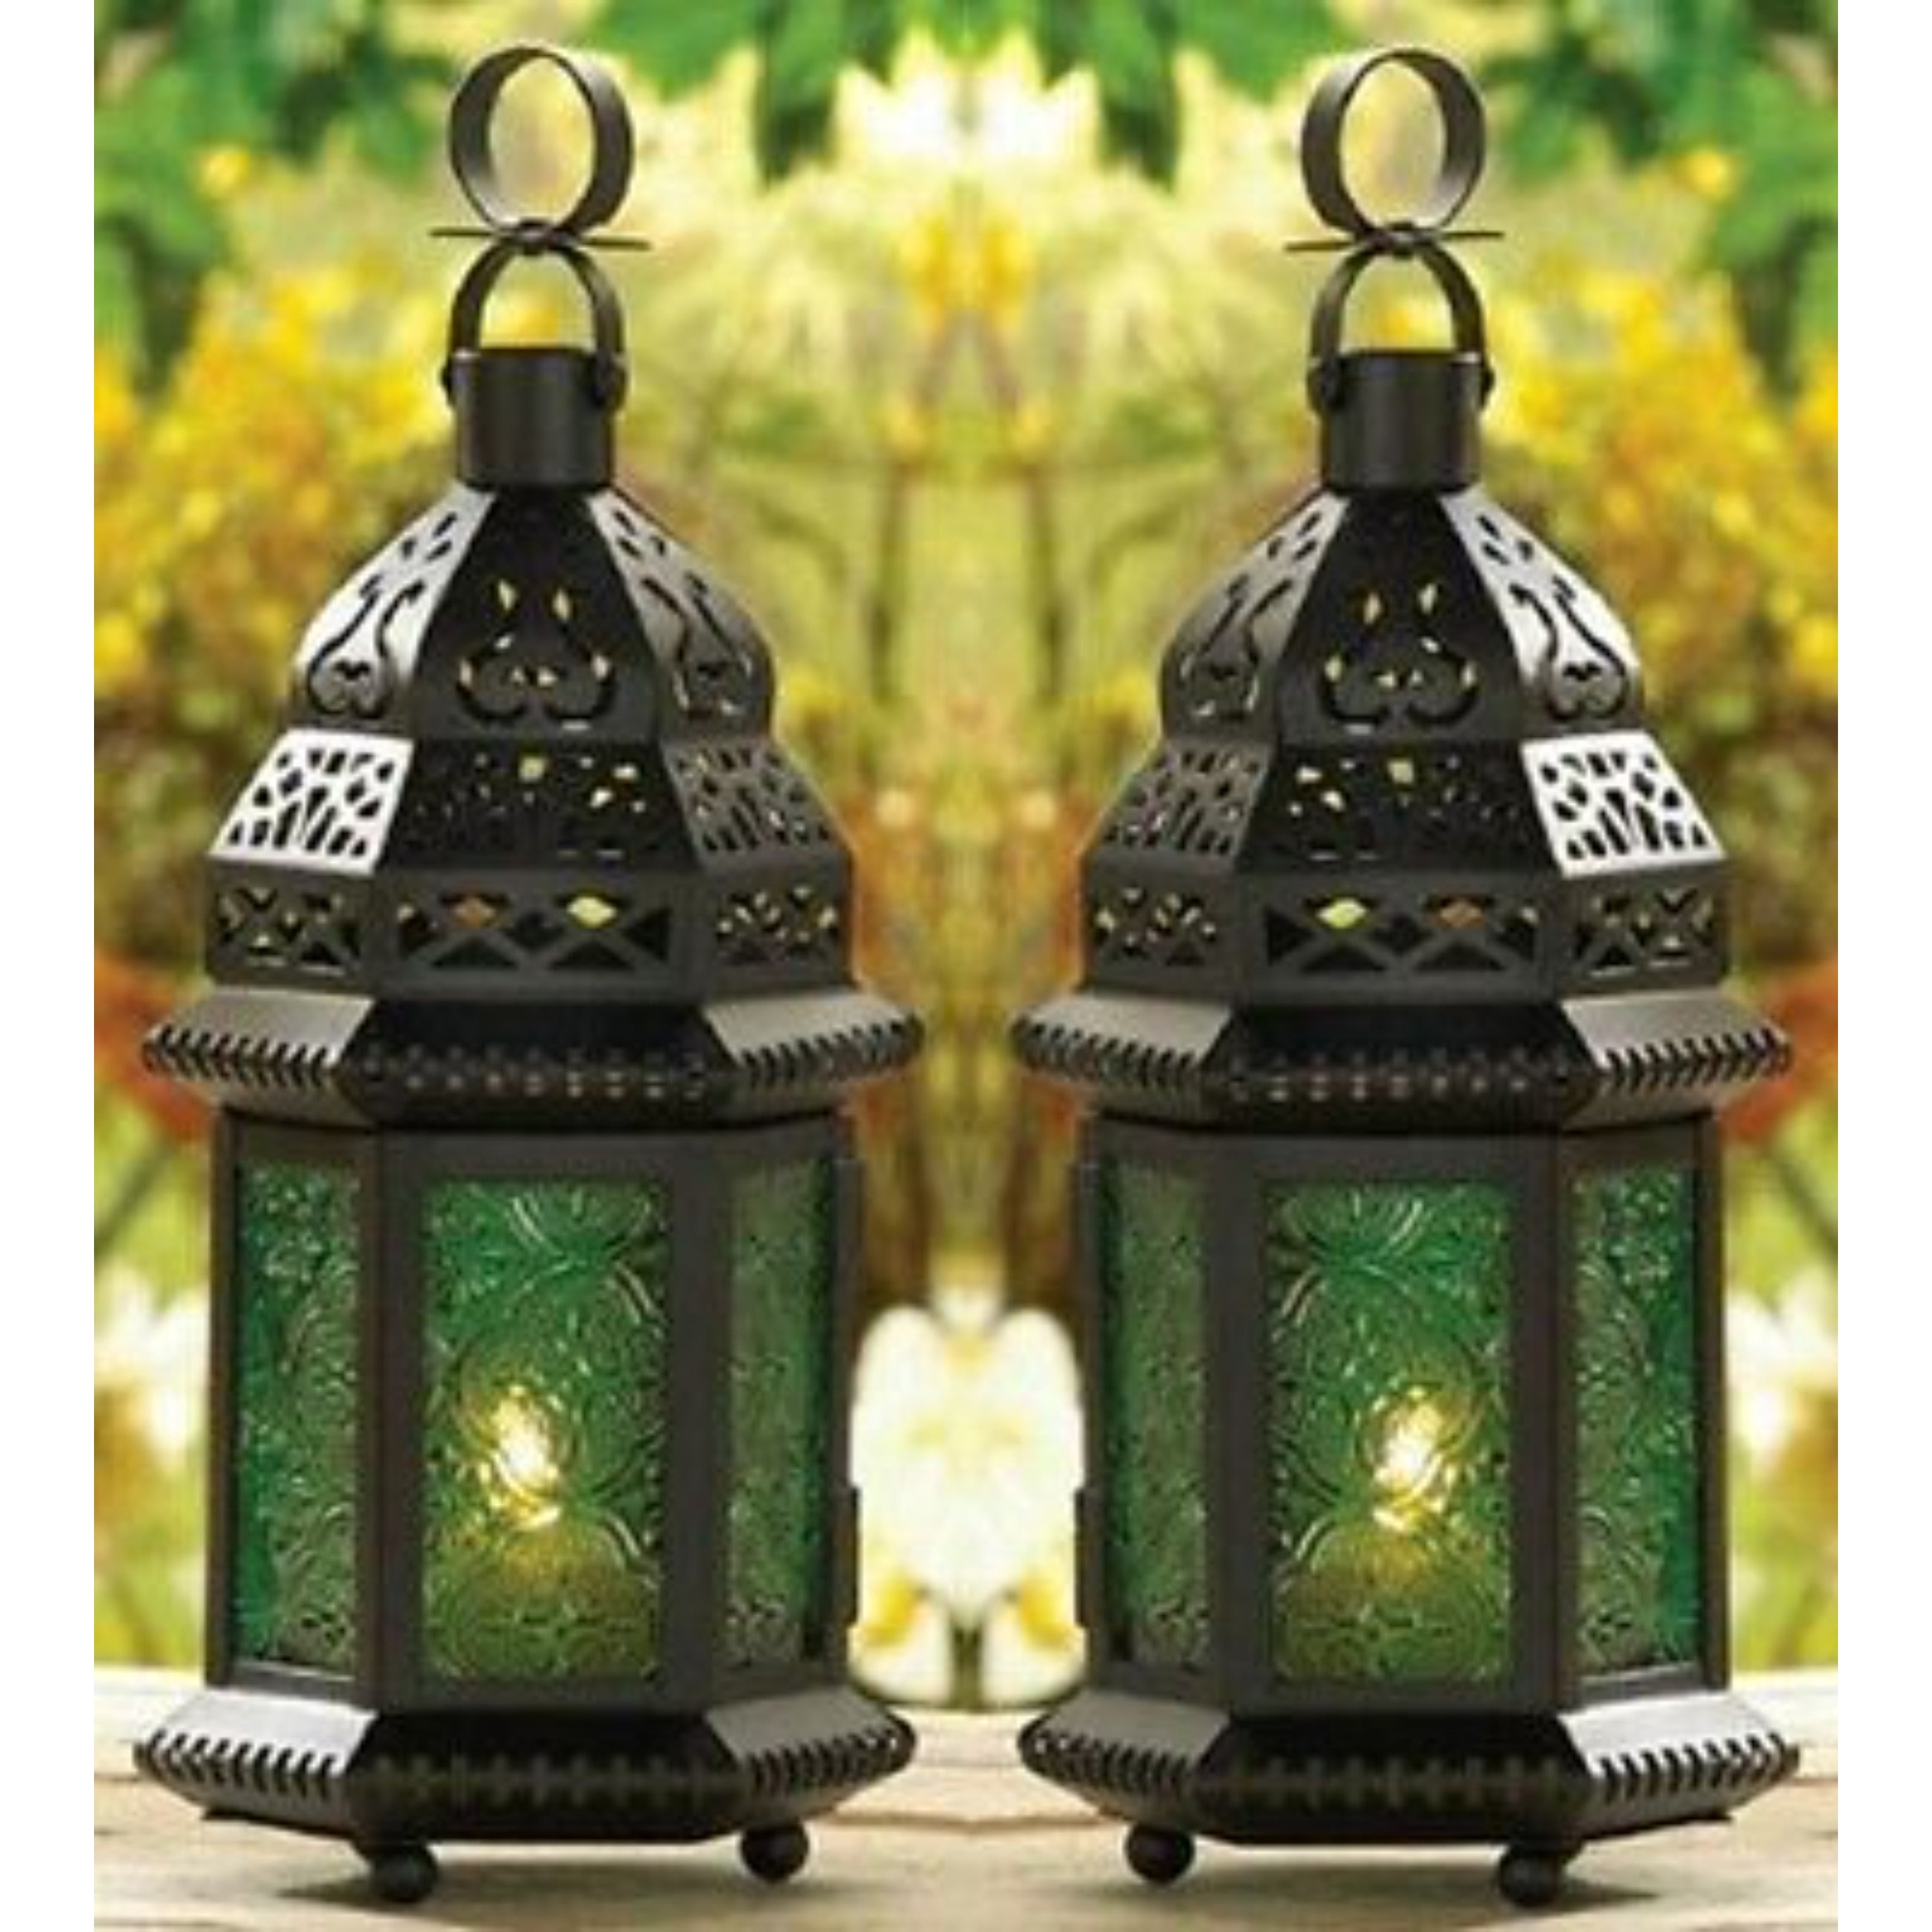 https://ak1.ostkcdn.com/images/products/is/images/direct/c33f45c56b4b4e587dbb27217cc3a897ae470021/Set-of-2-Green-Glass-Moroccan-Lanterns.jpg